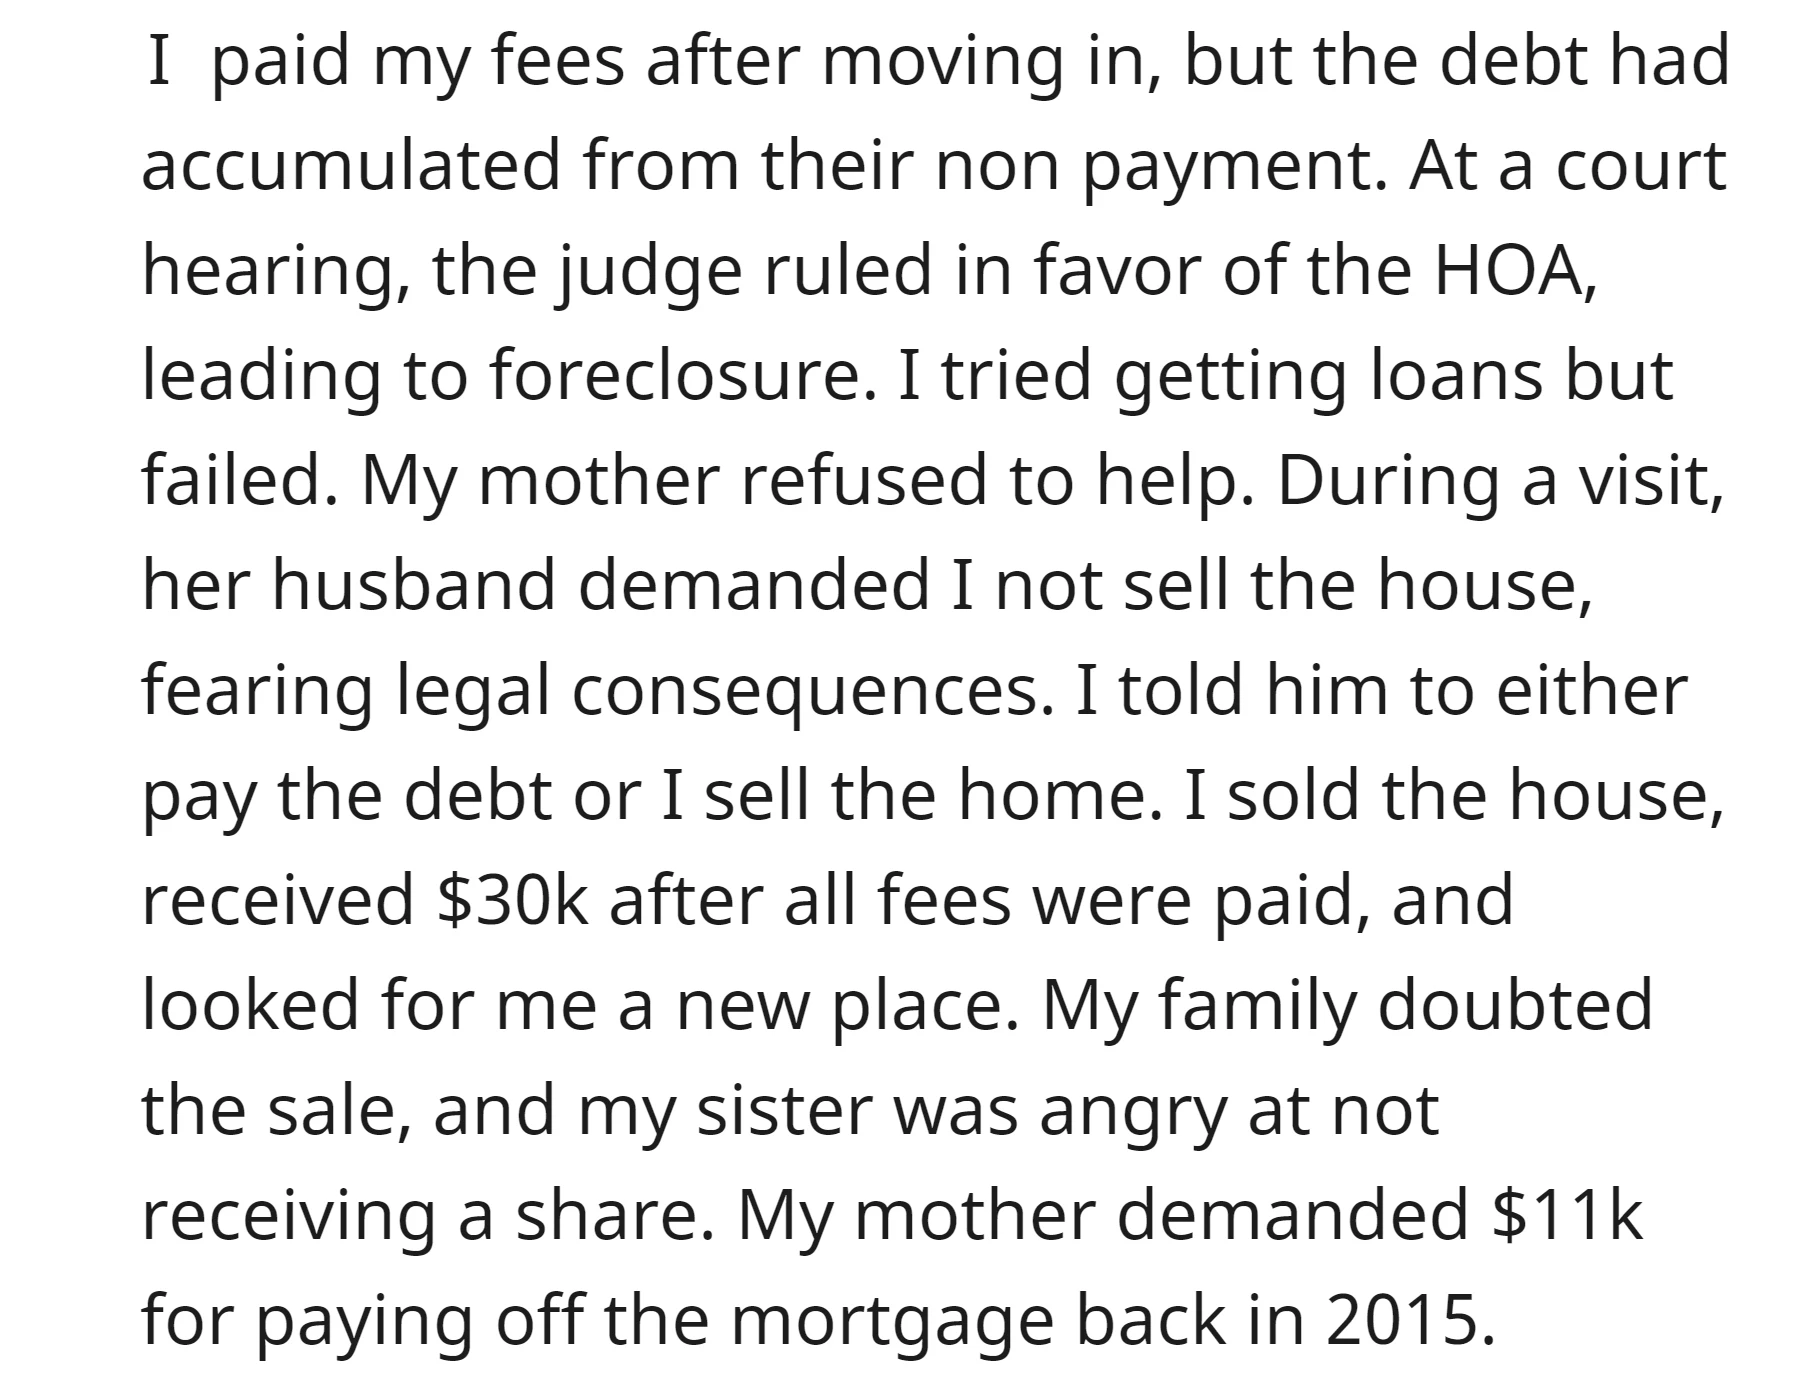 OP sold the house for $30k, and their mother demanded $11k for a past mortgage payment